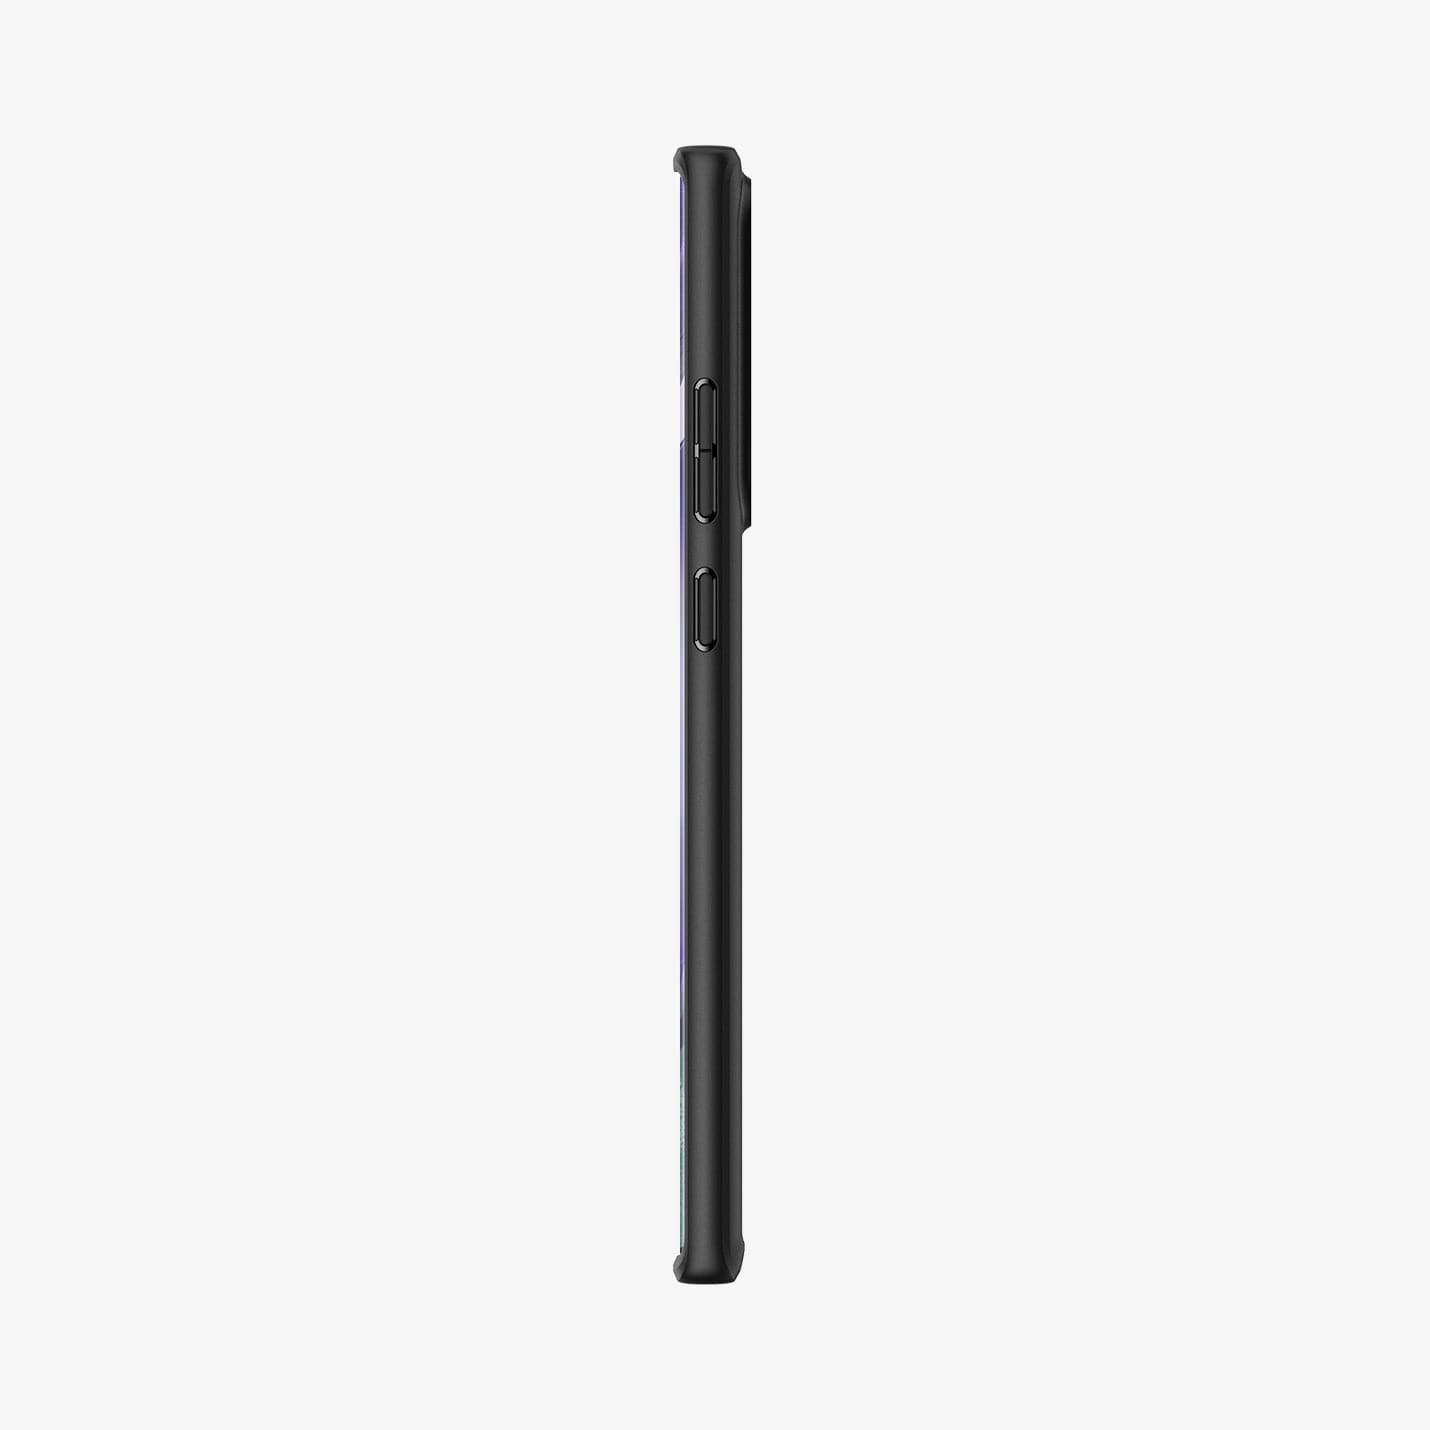 ACS01394 - Galaxy Note 20 Series Ultra Hybrid Case in matte black showing the side